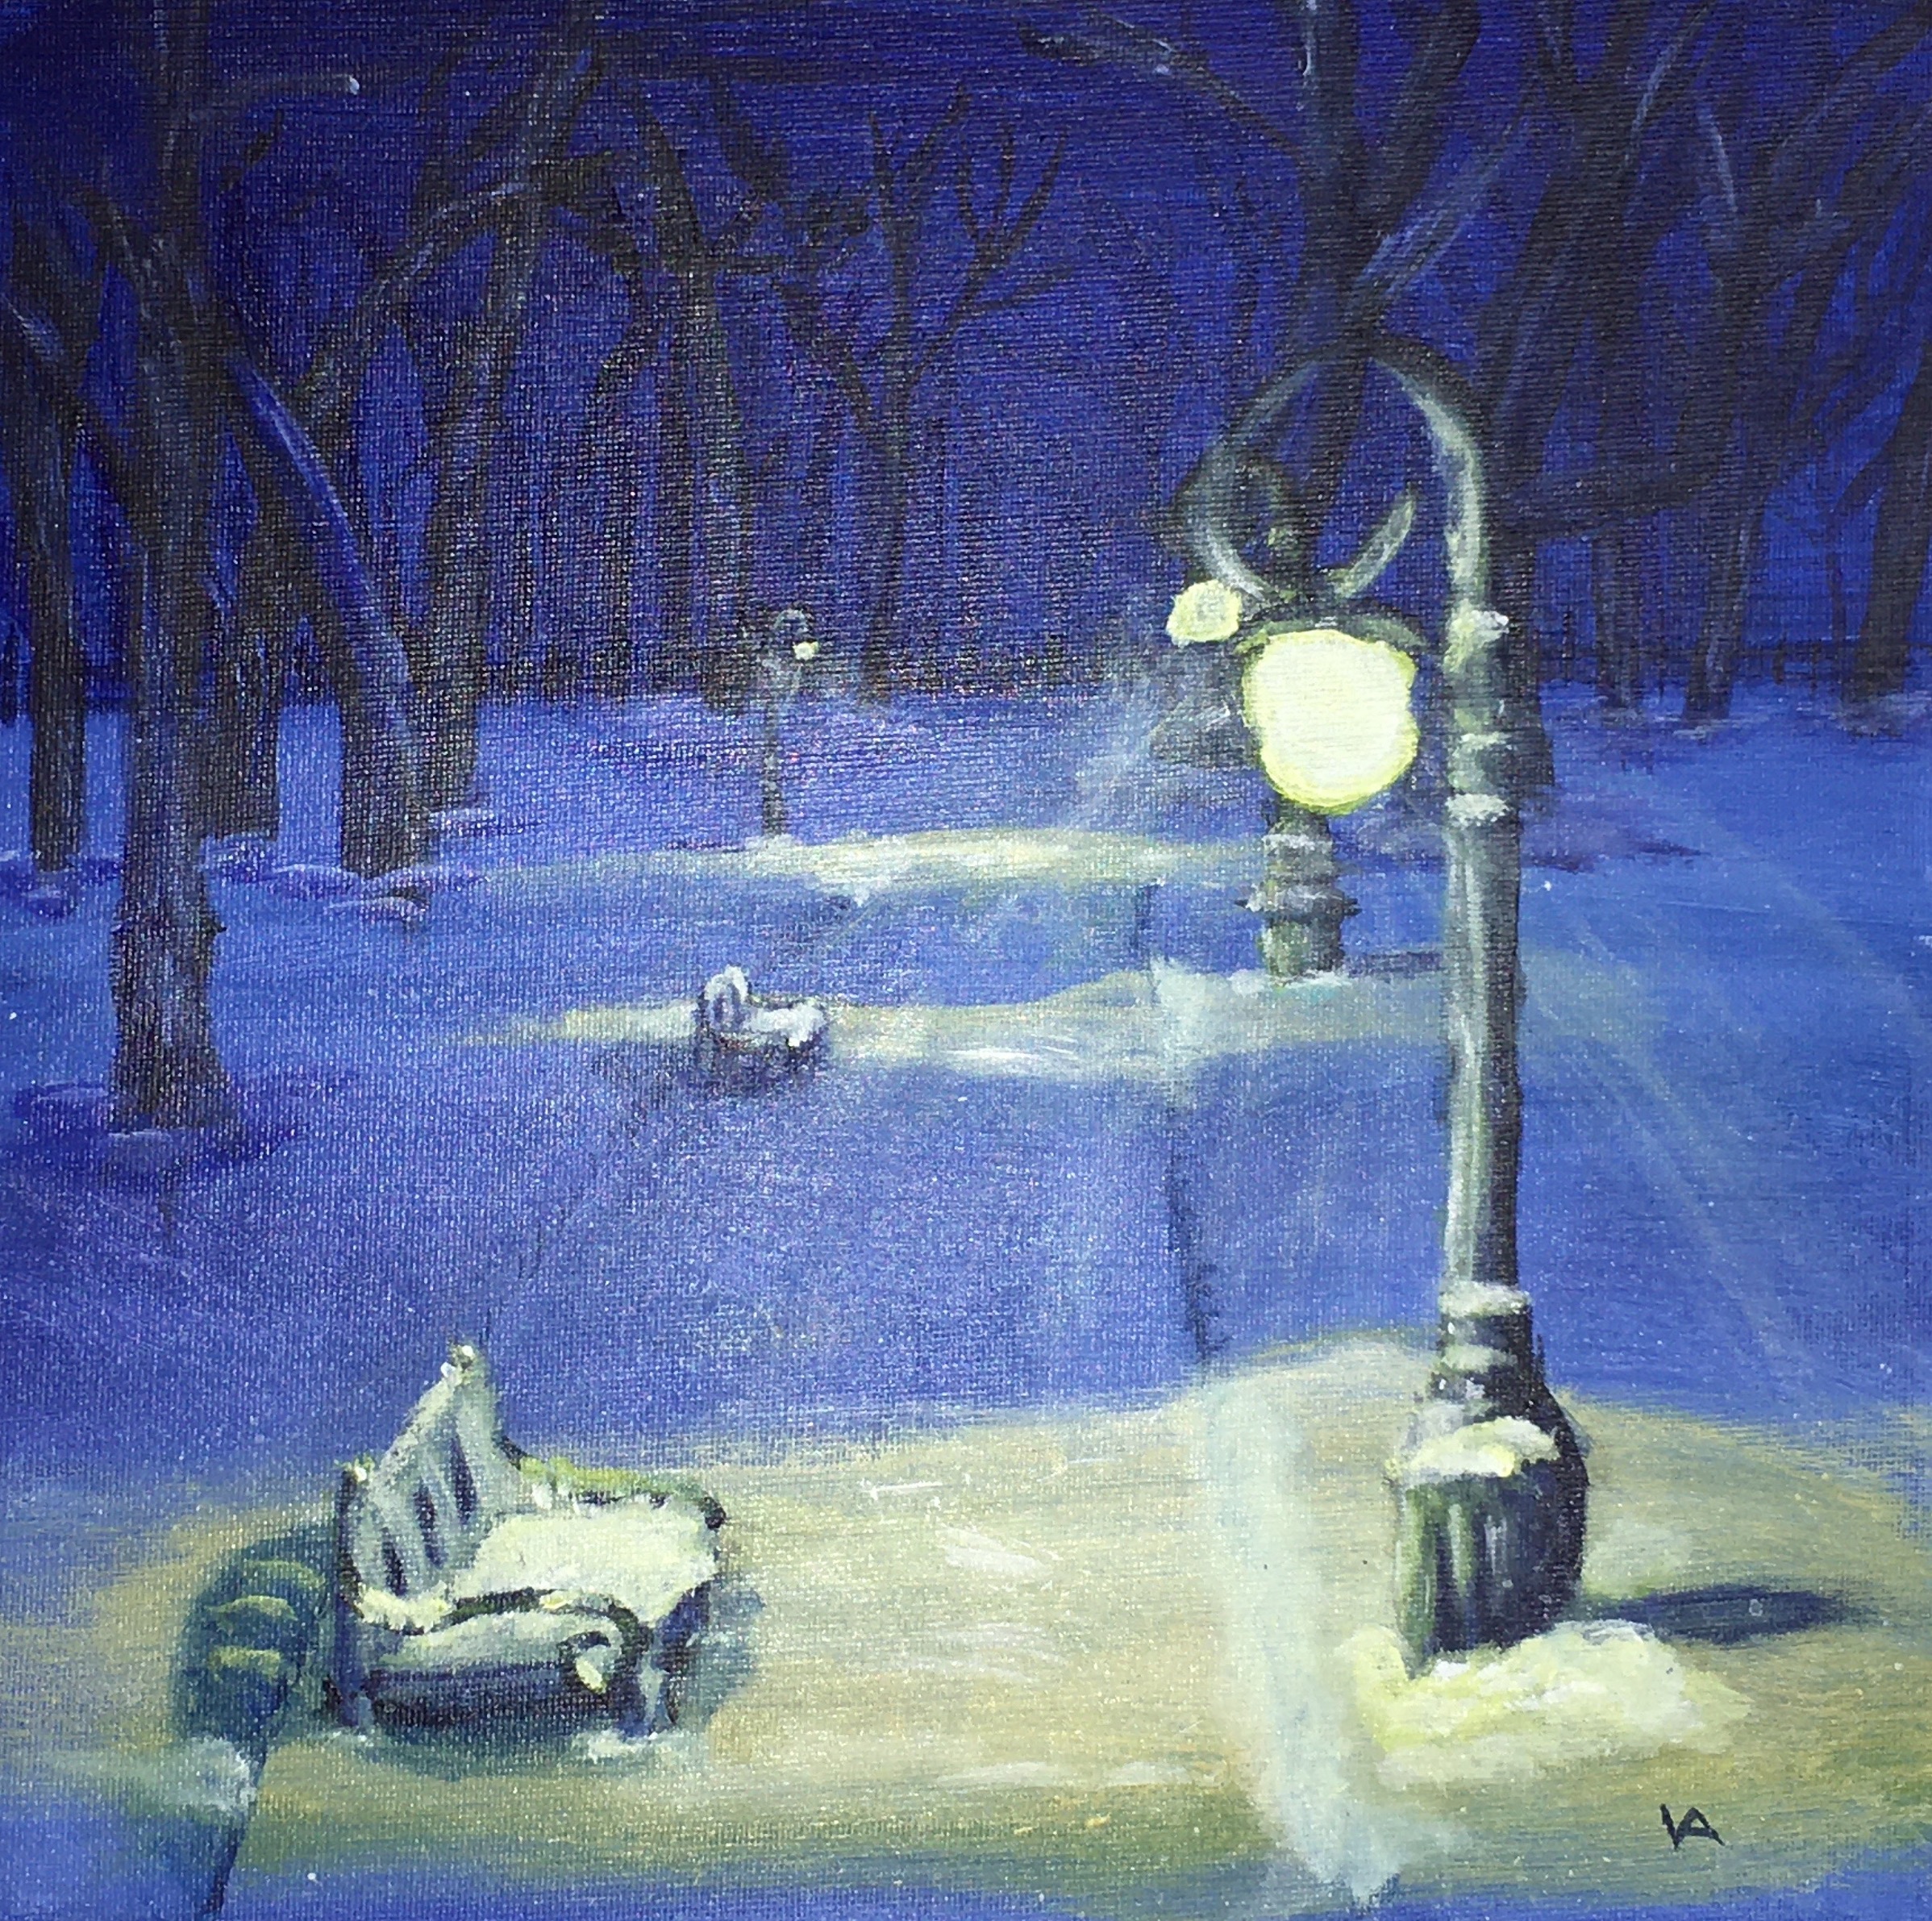 "Luminous Cold Night" by Victoria Anderson, acrylic on canvas